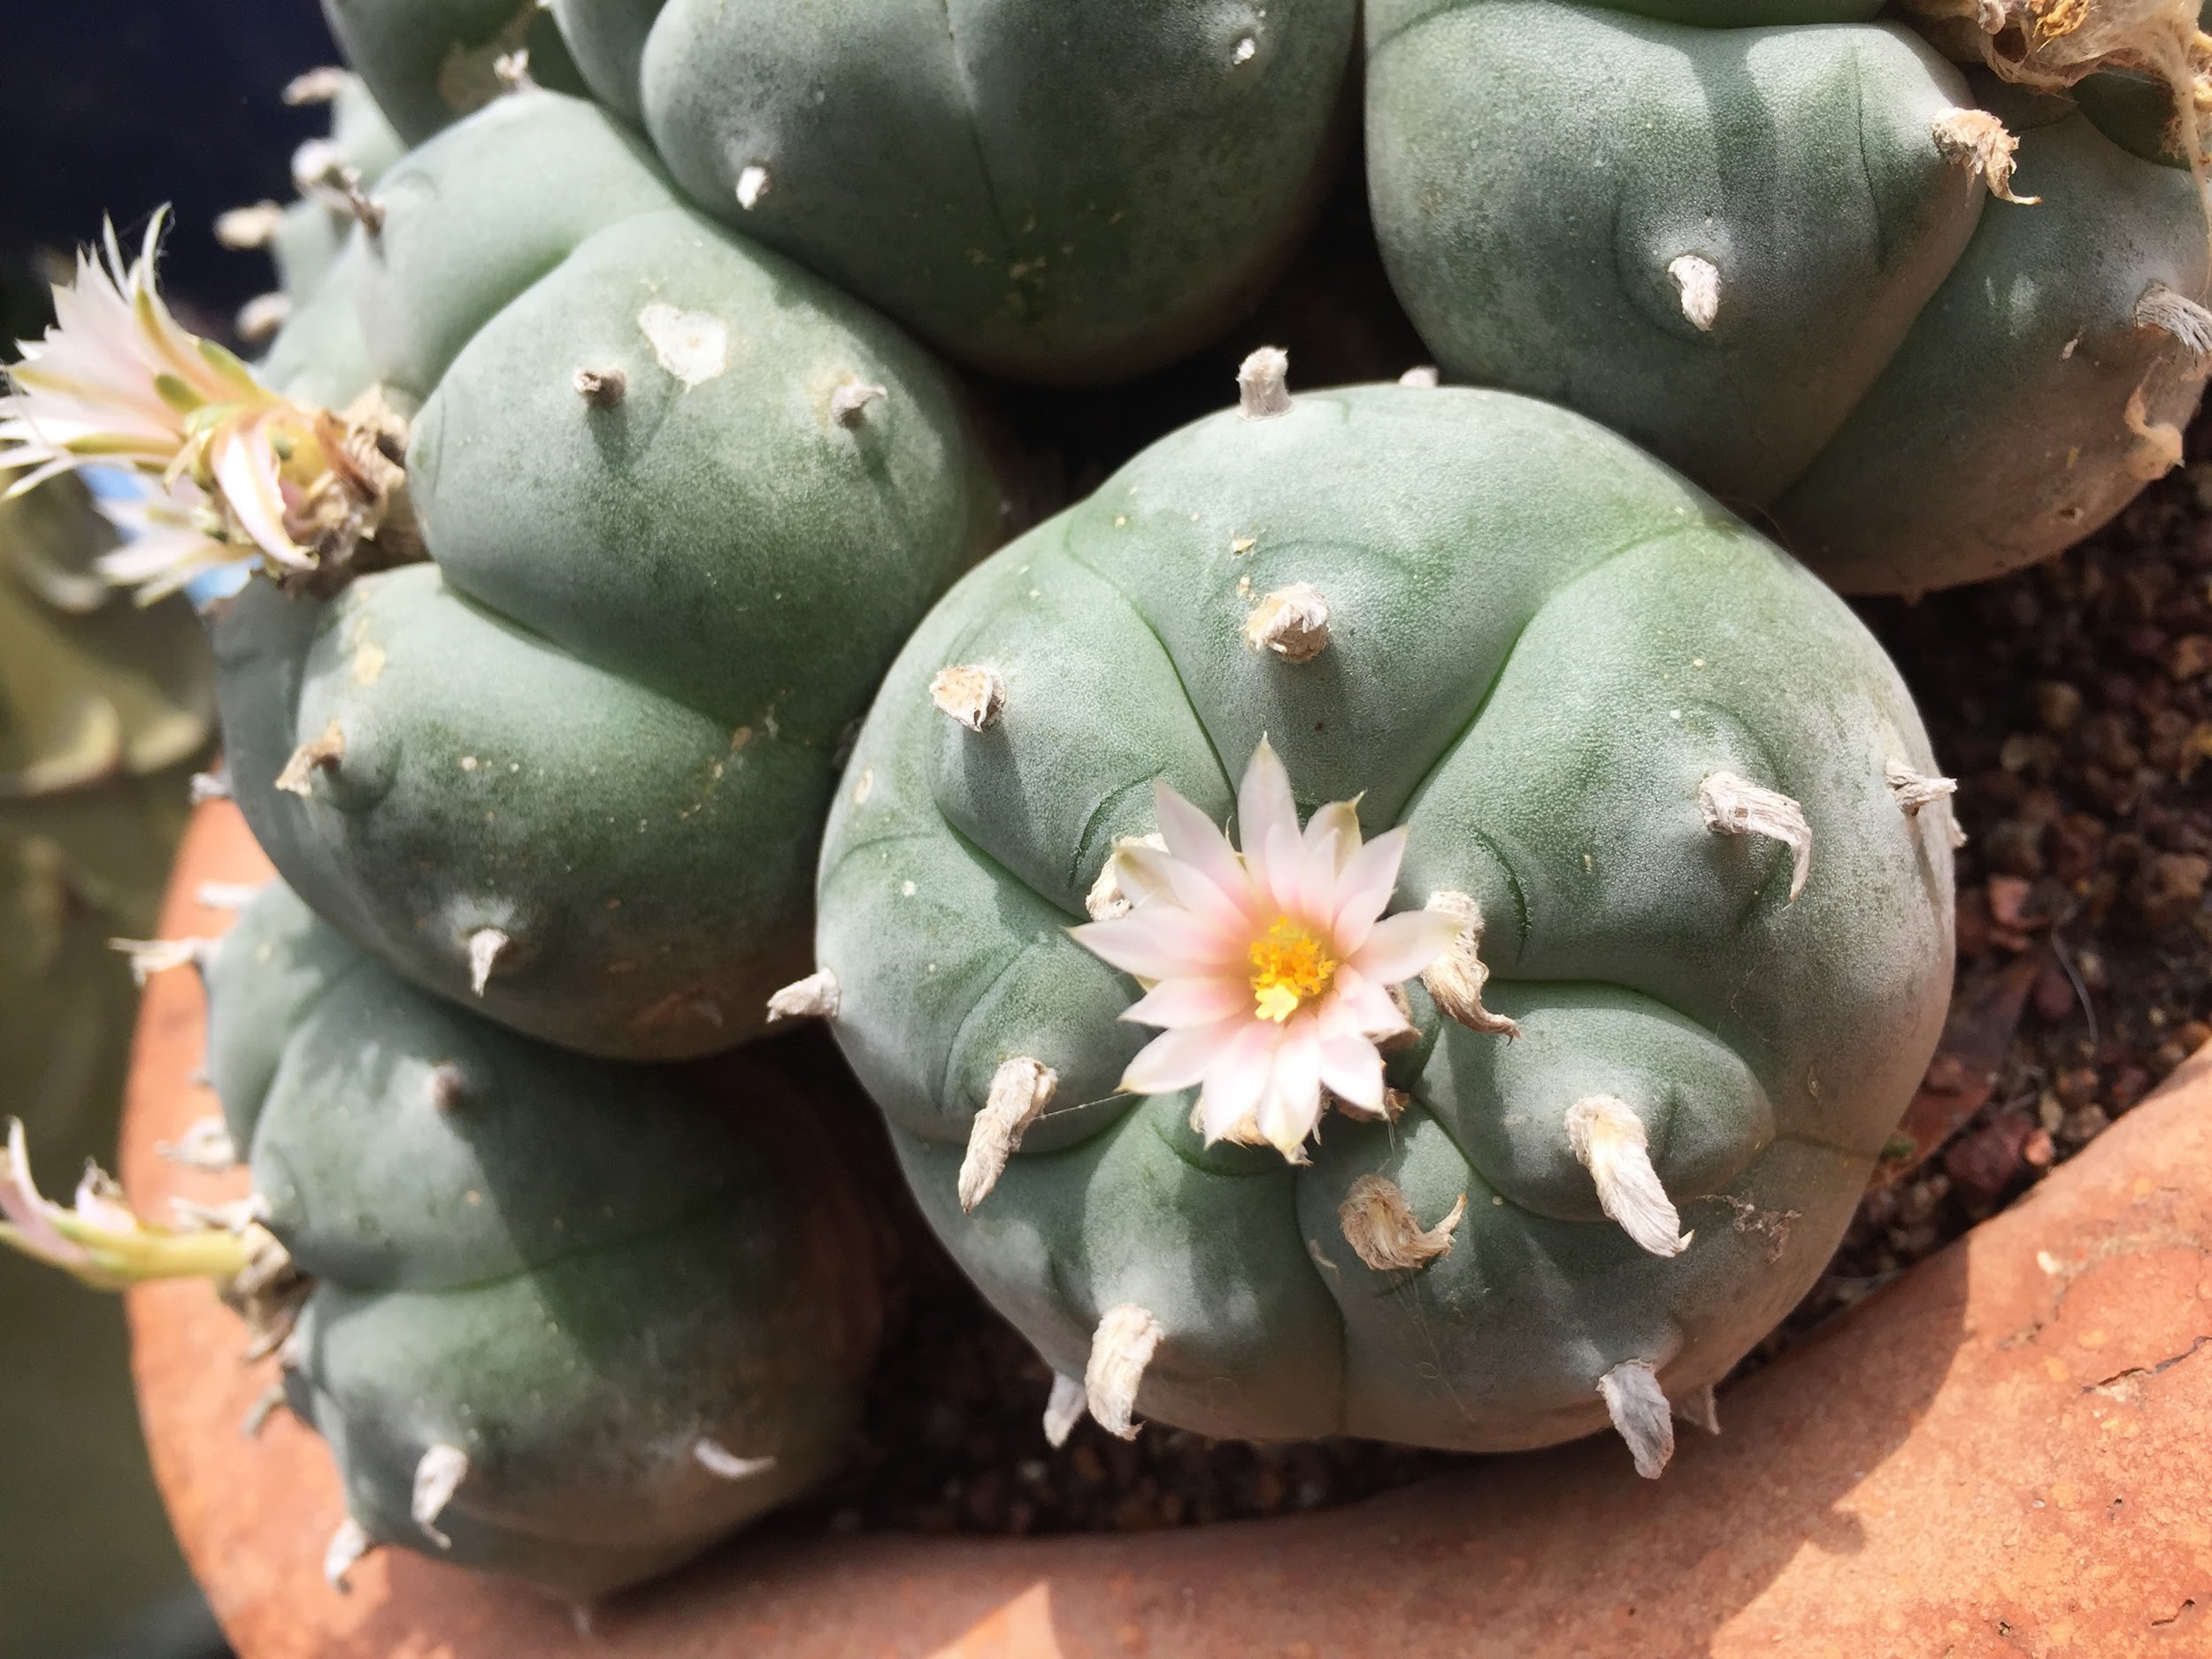 keep an eye out for peyote plants